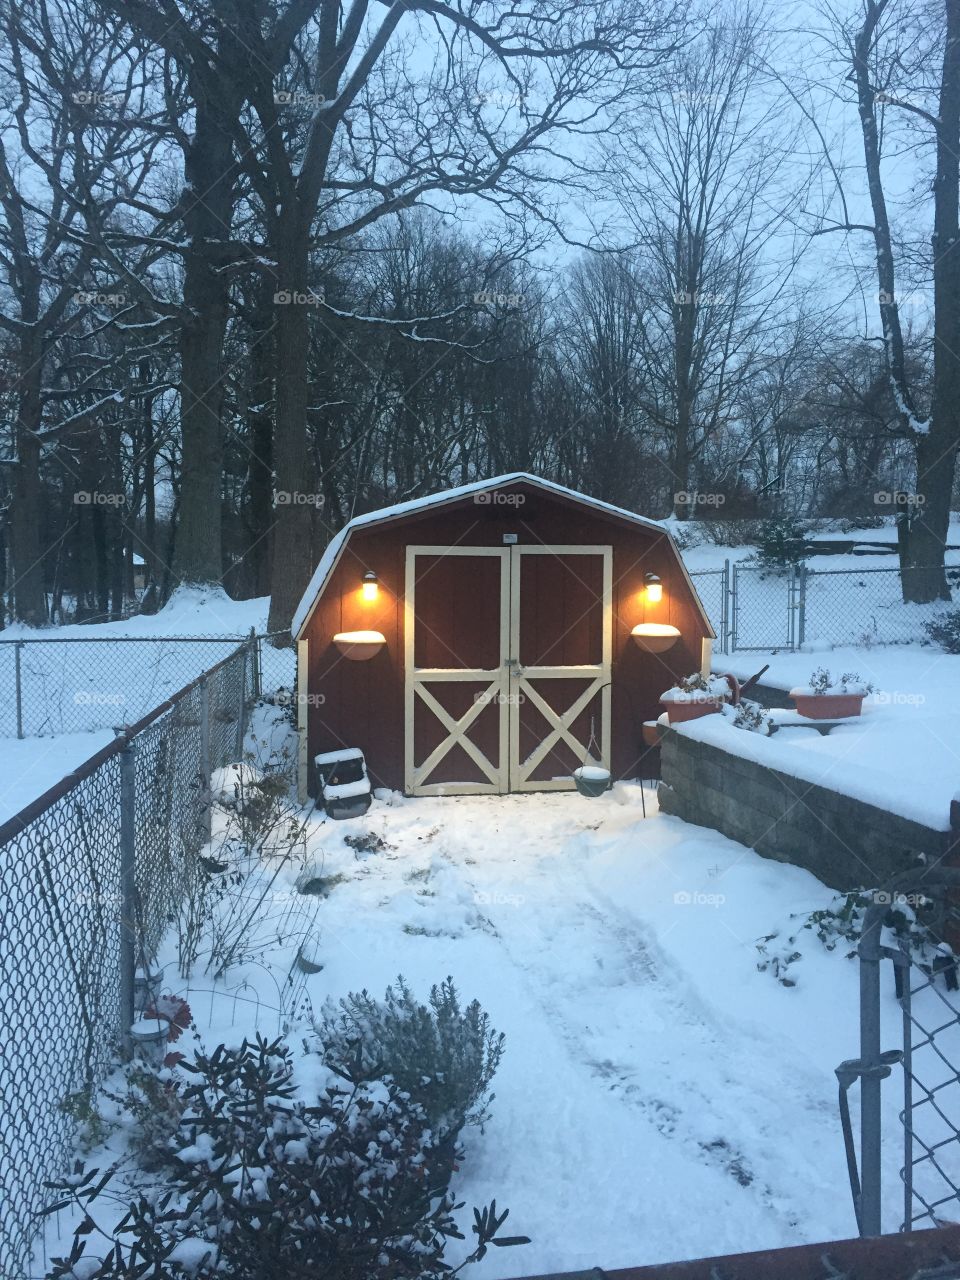 Shed in the snow